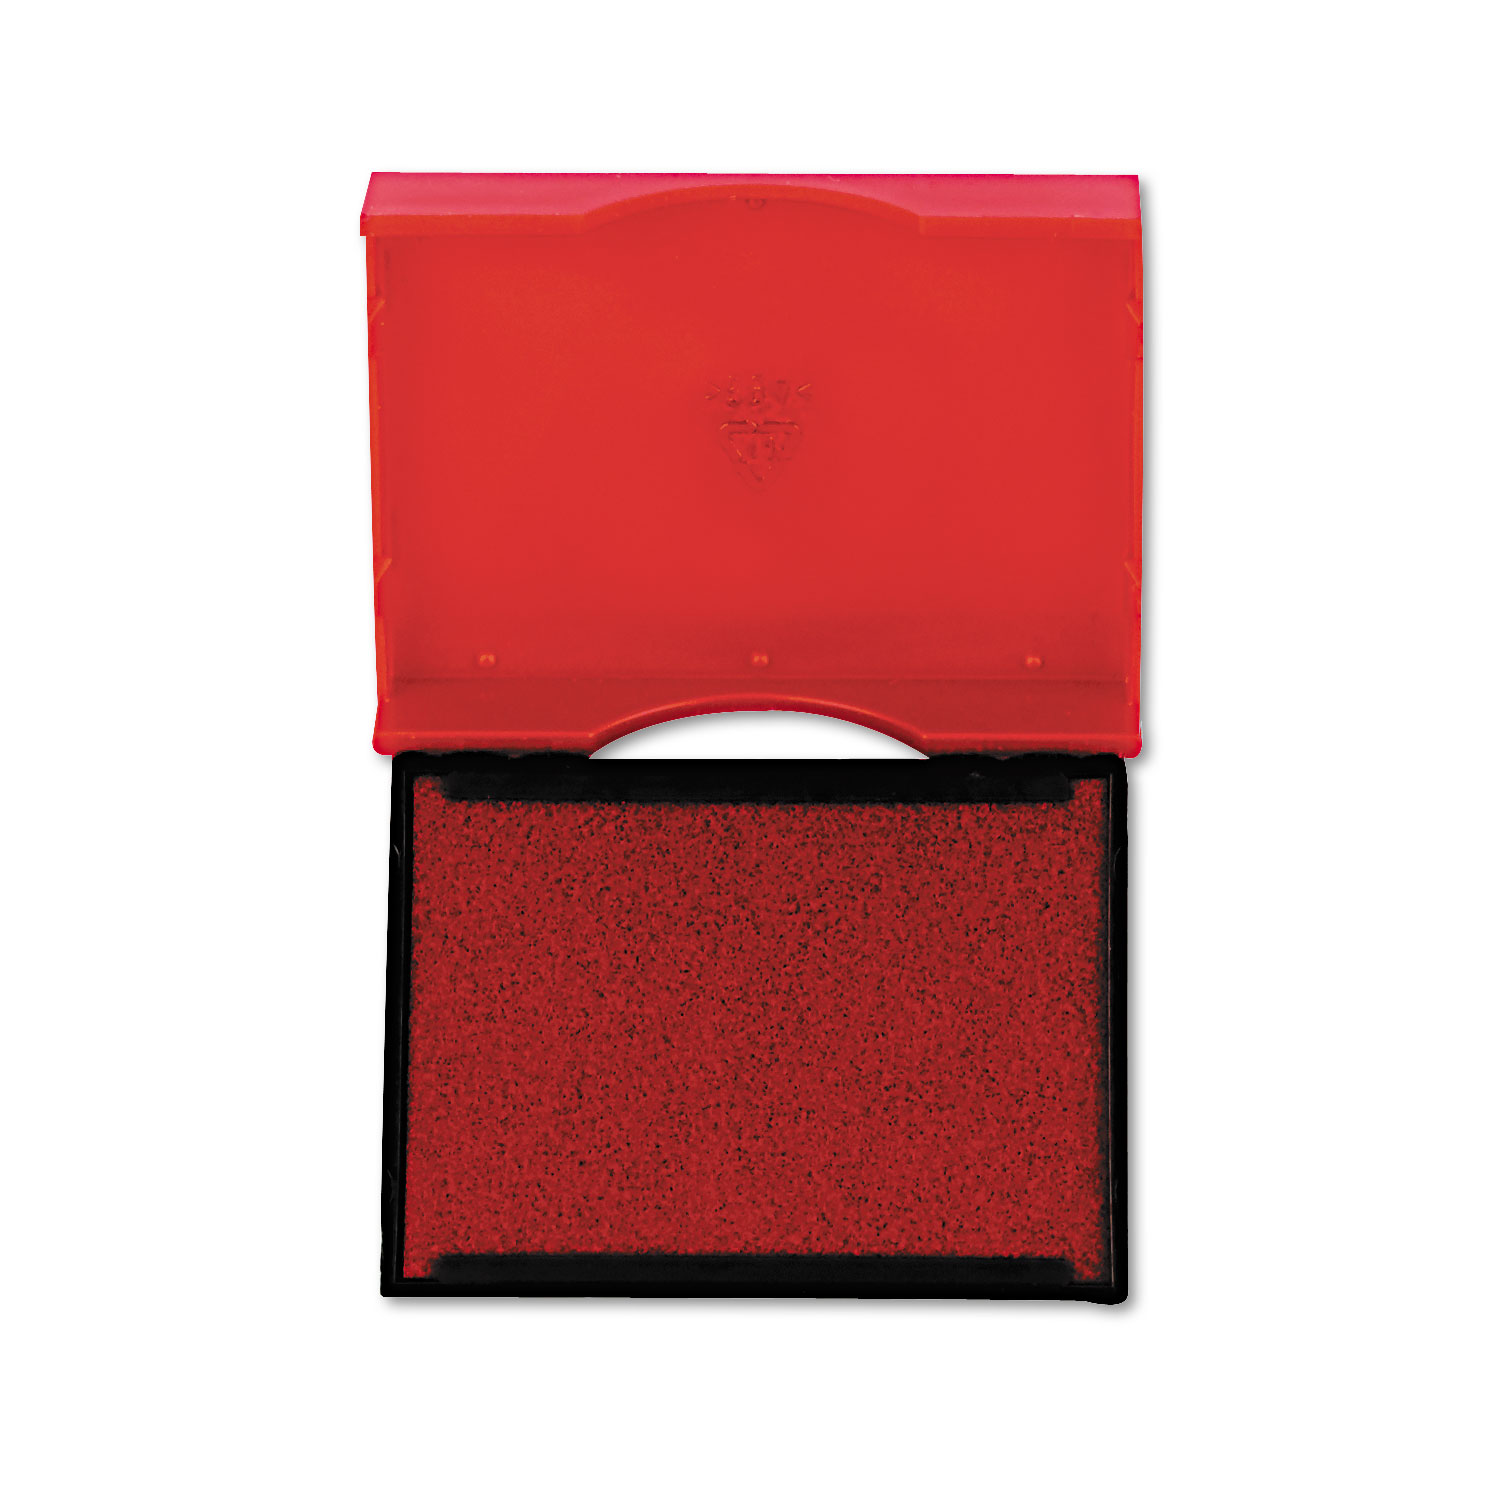 Trodat T4750 Stamp Replacement Pad, 1 x 1 5/8, Red